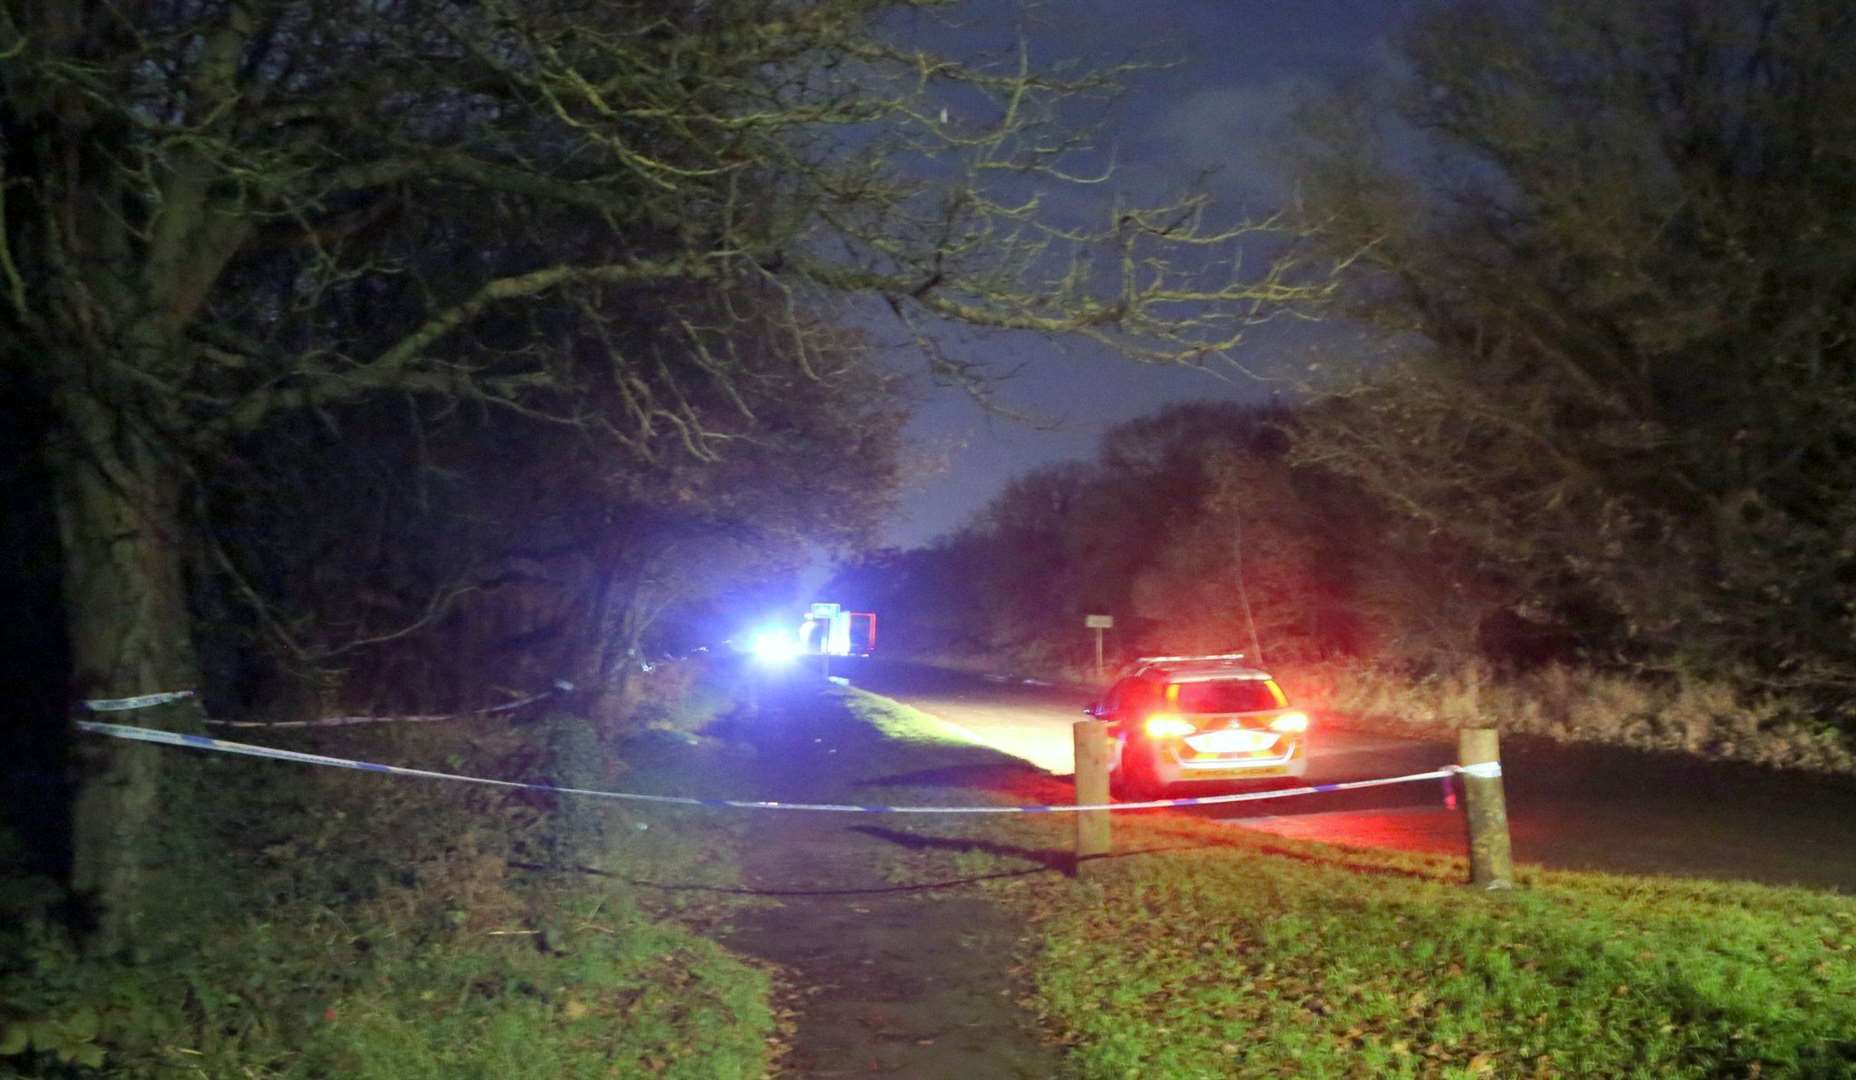 The taped off path by Dartford heath (Picture: UKNIP)